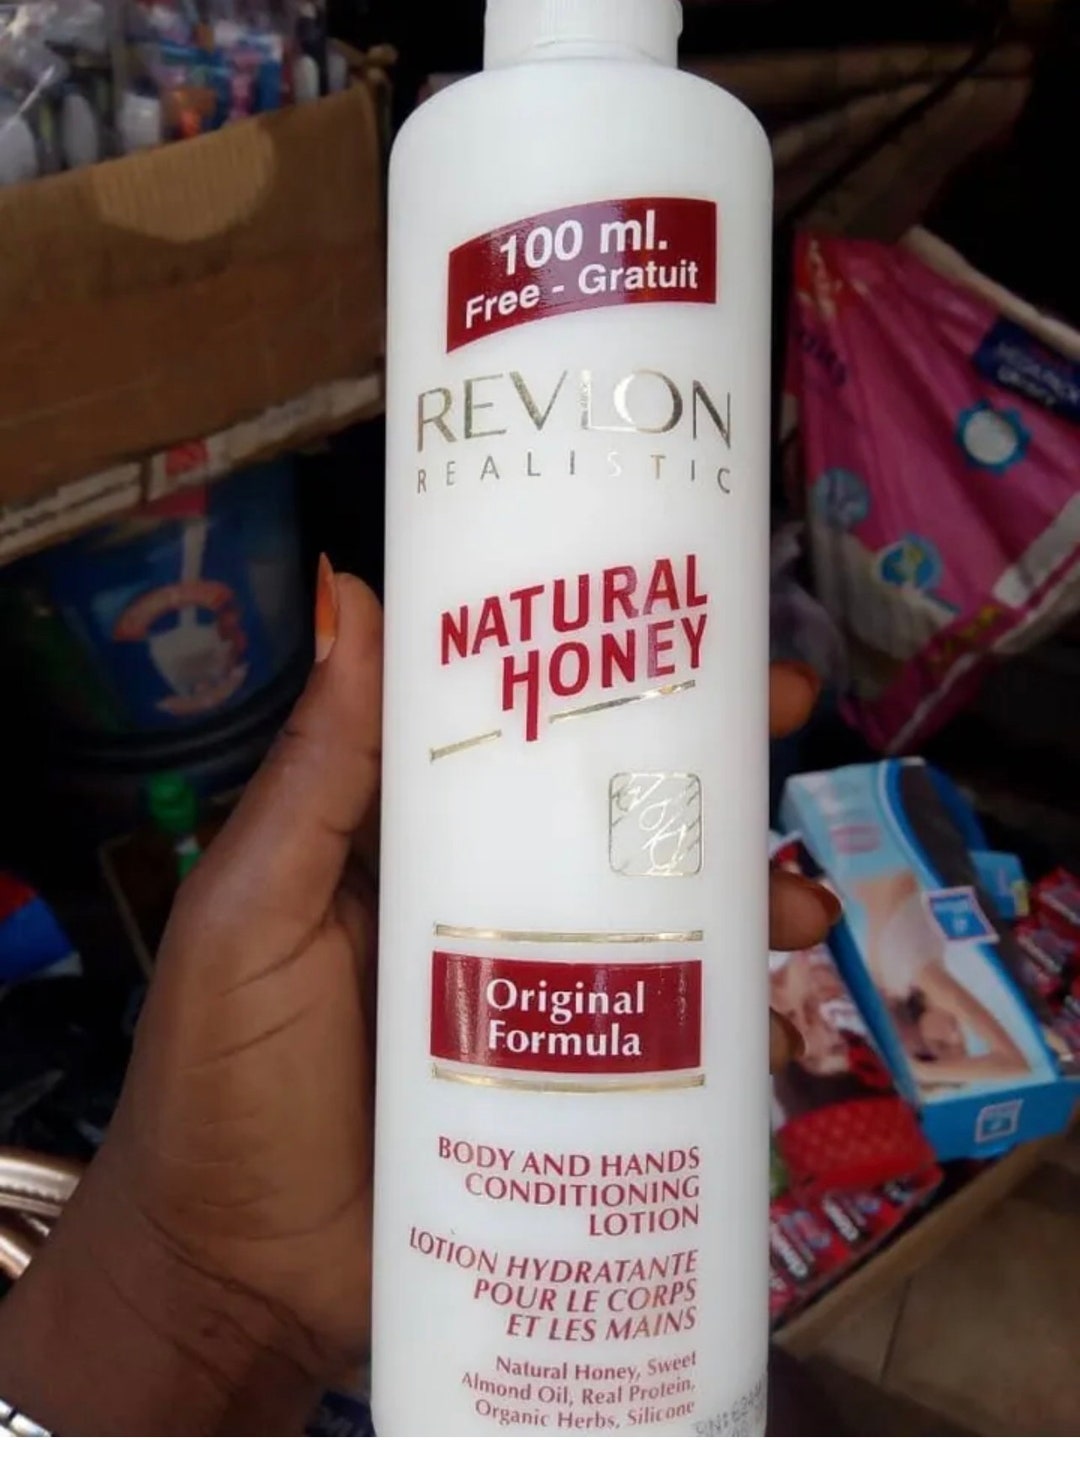 Revlon Realistic Natural Body and Face - New Zealand